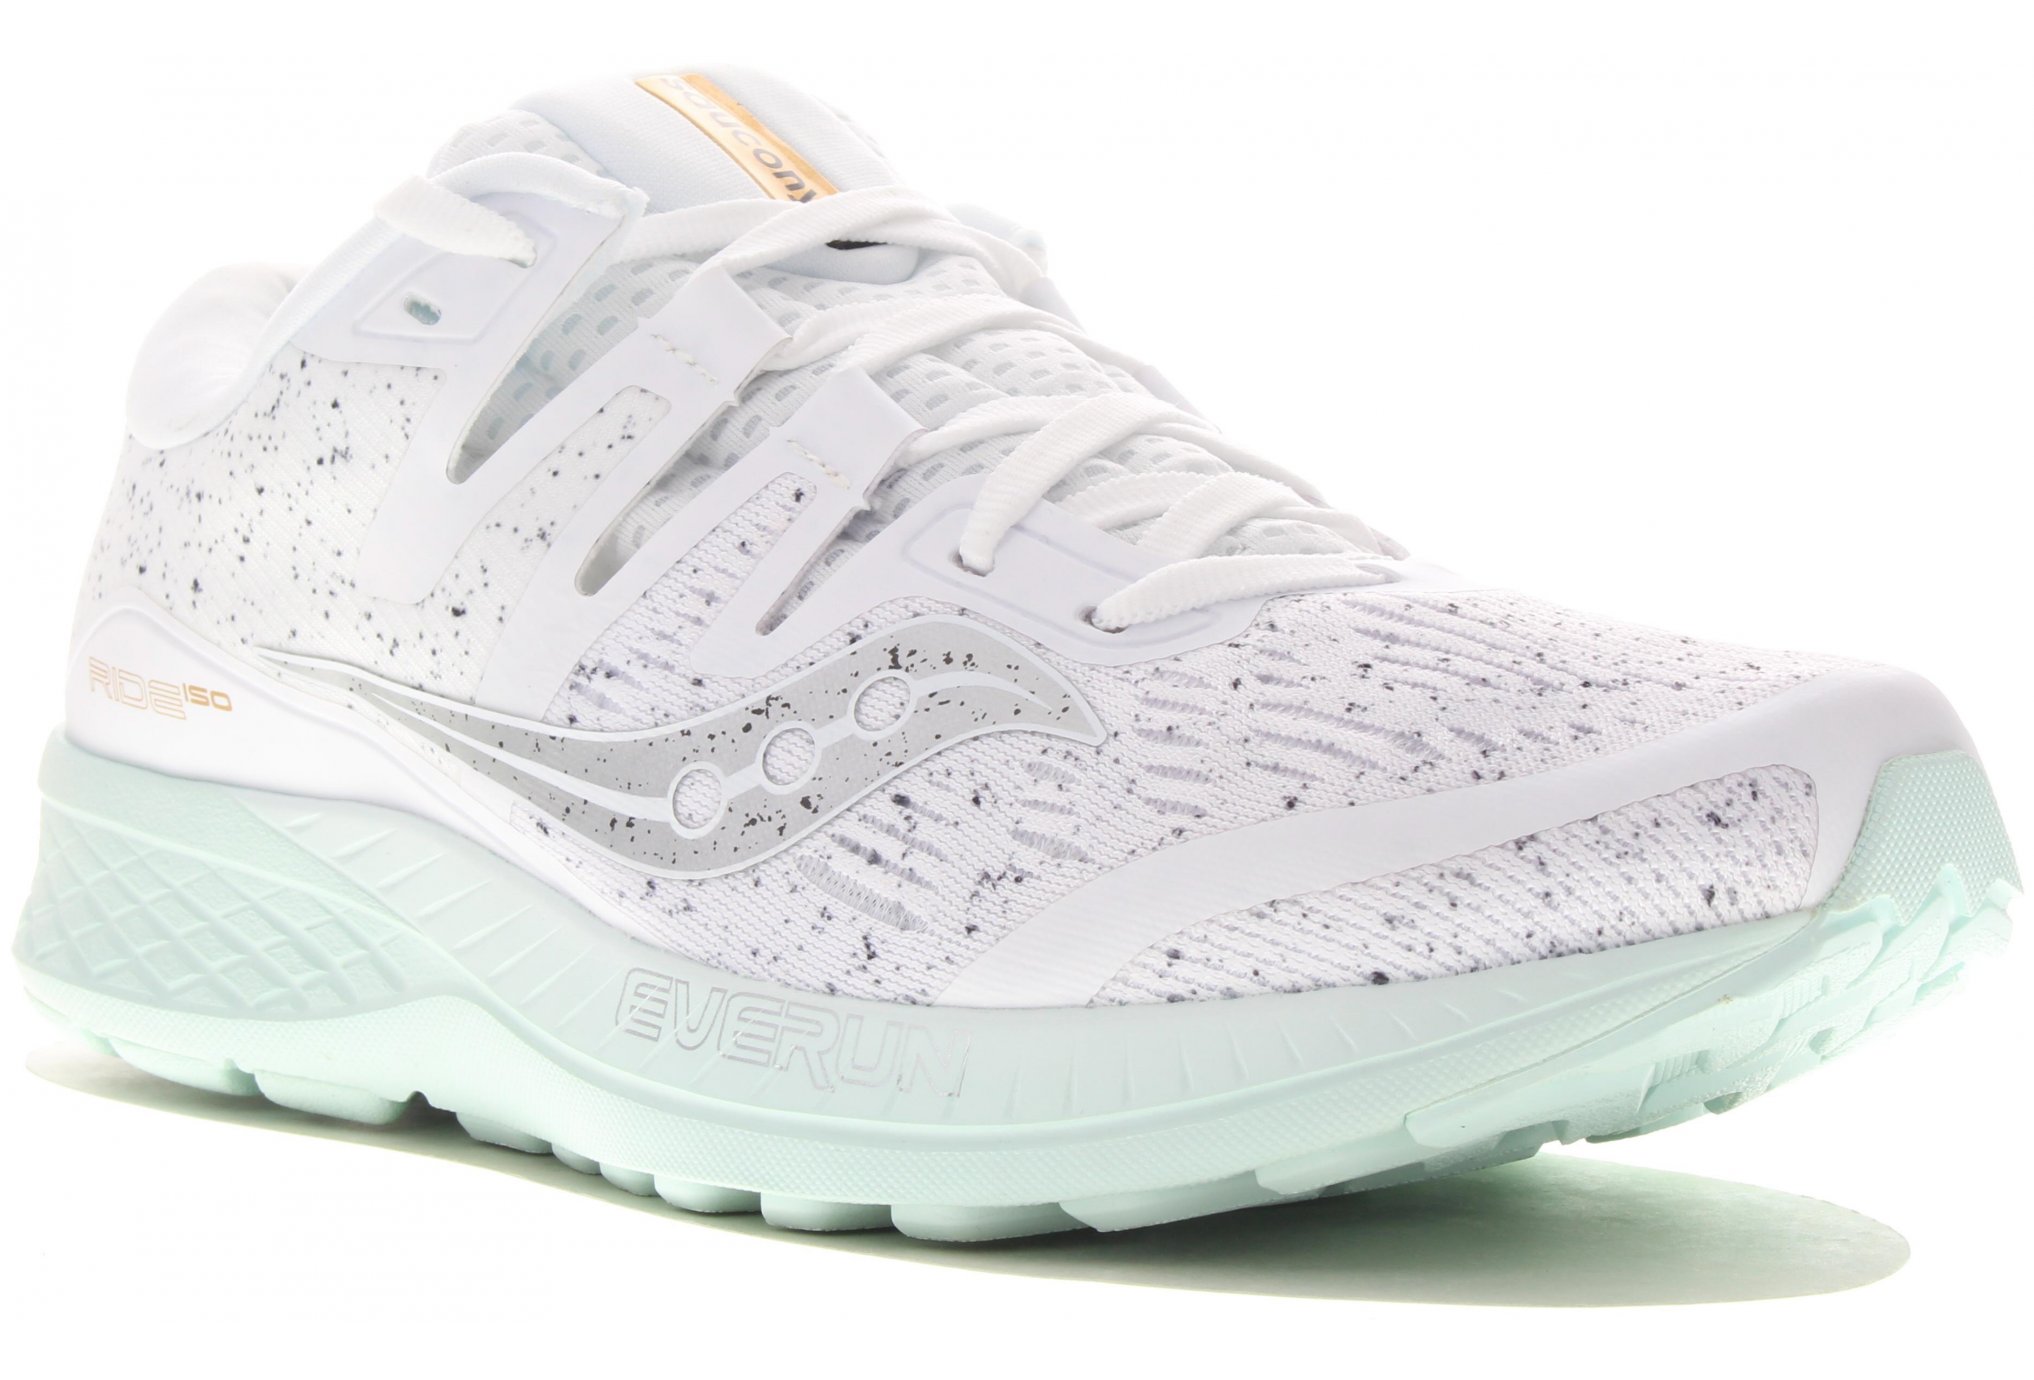 Saucony Ride iso white noise w dittique chaussures femme